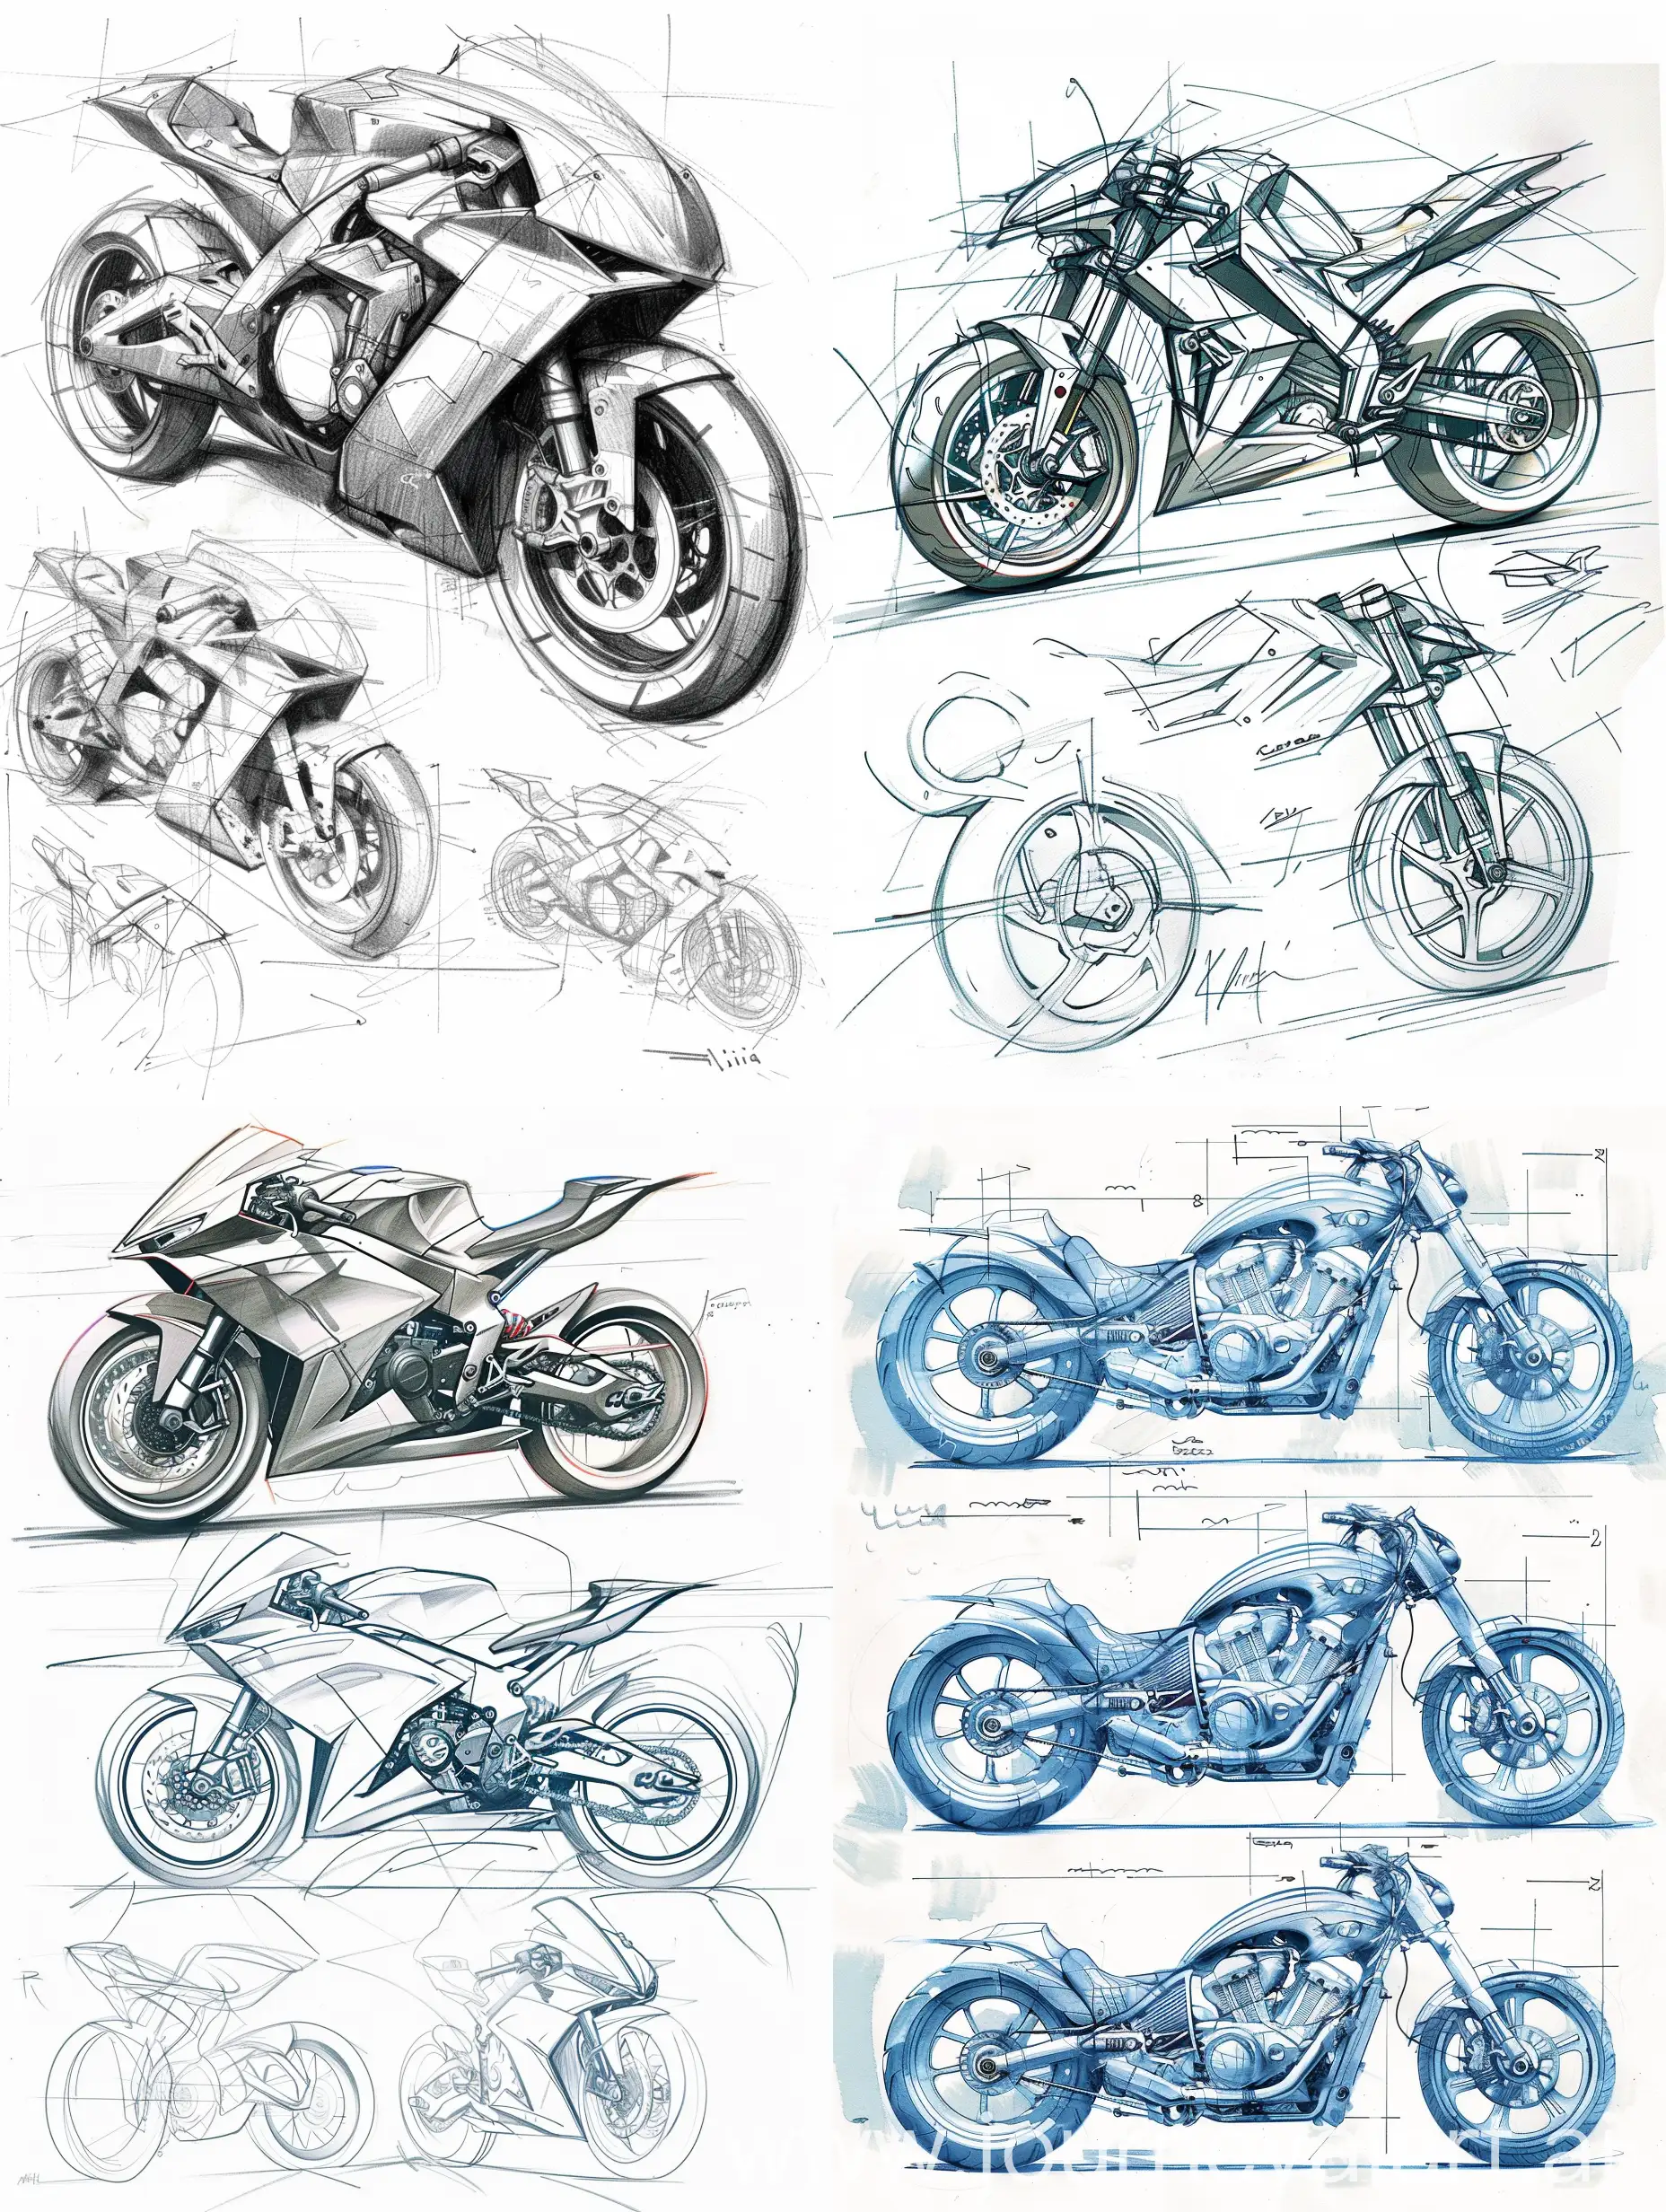 Modern-Motorcycle-Concept-Sketches-in-Clean-Lines-on-White-Background